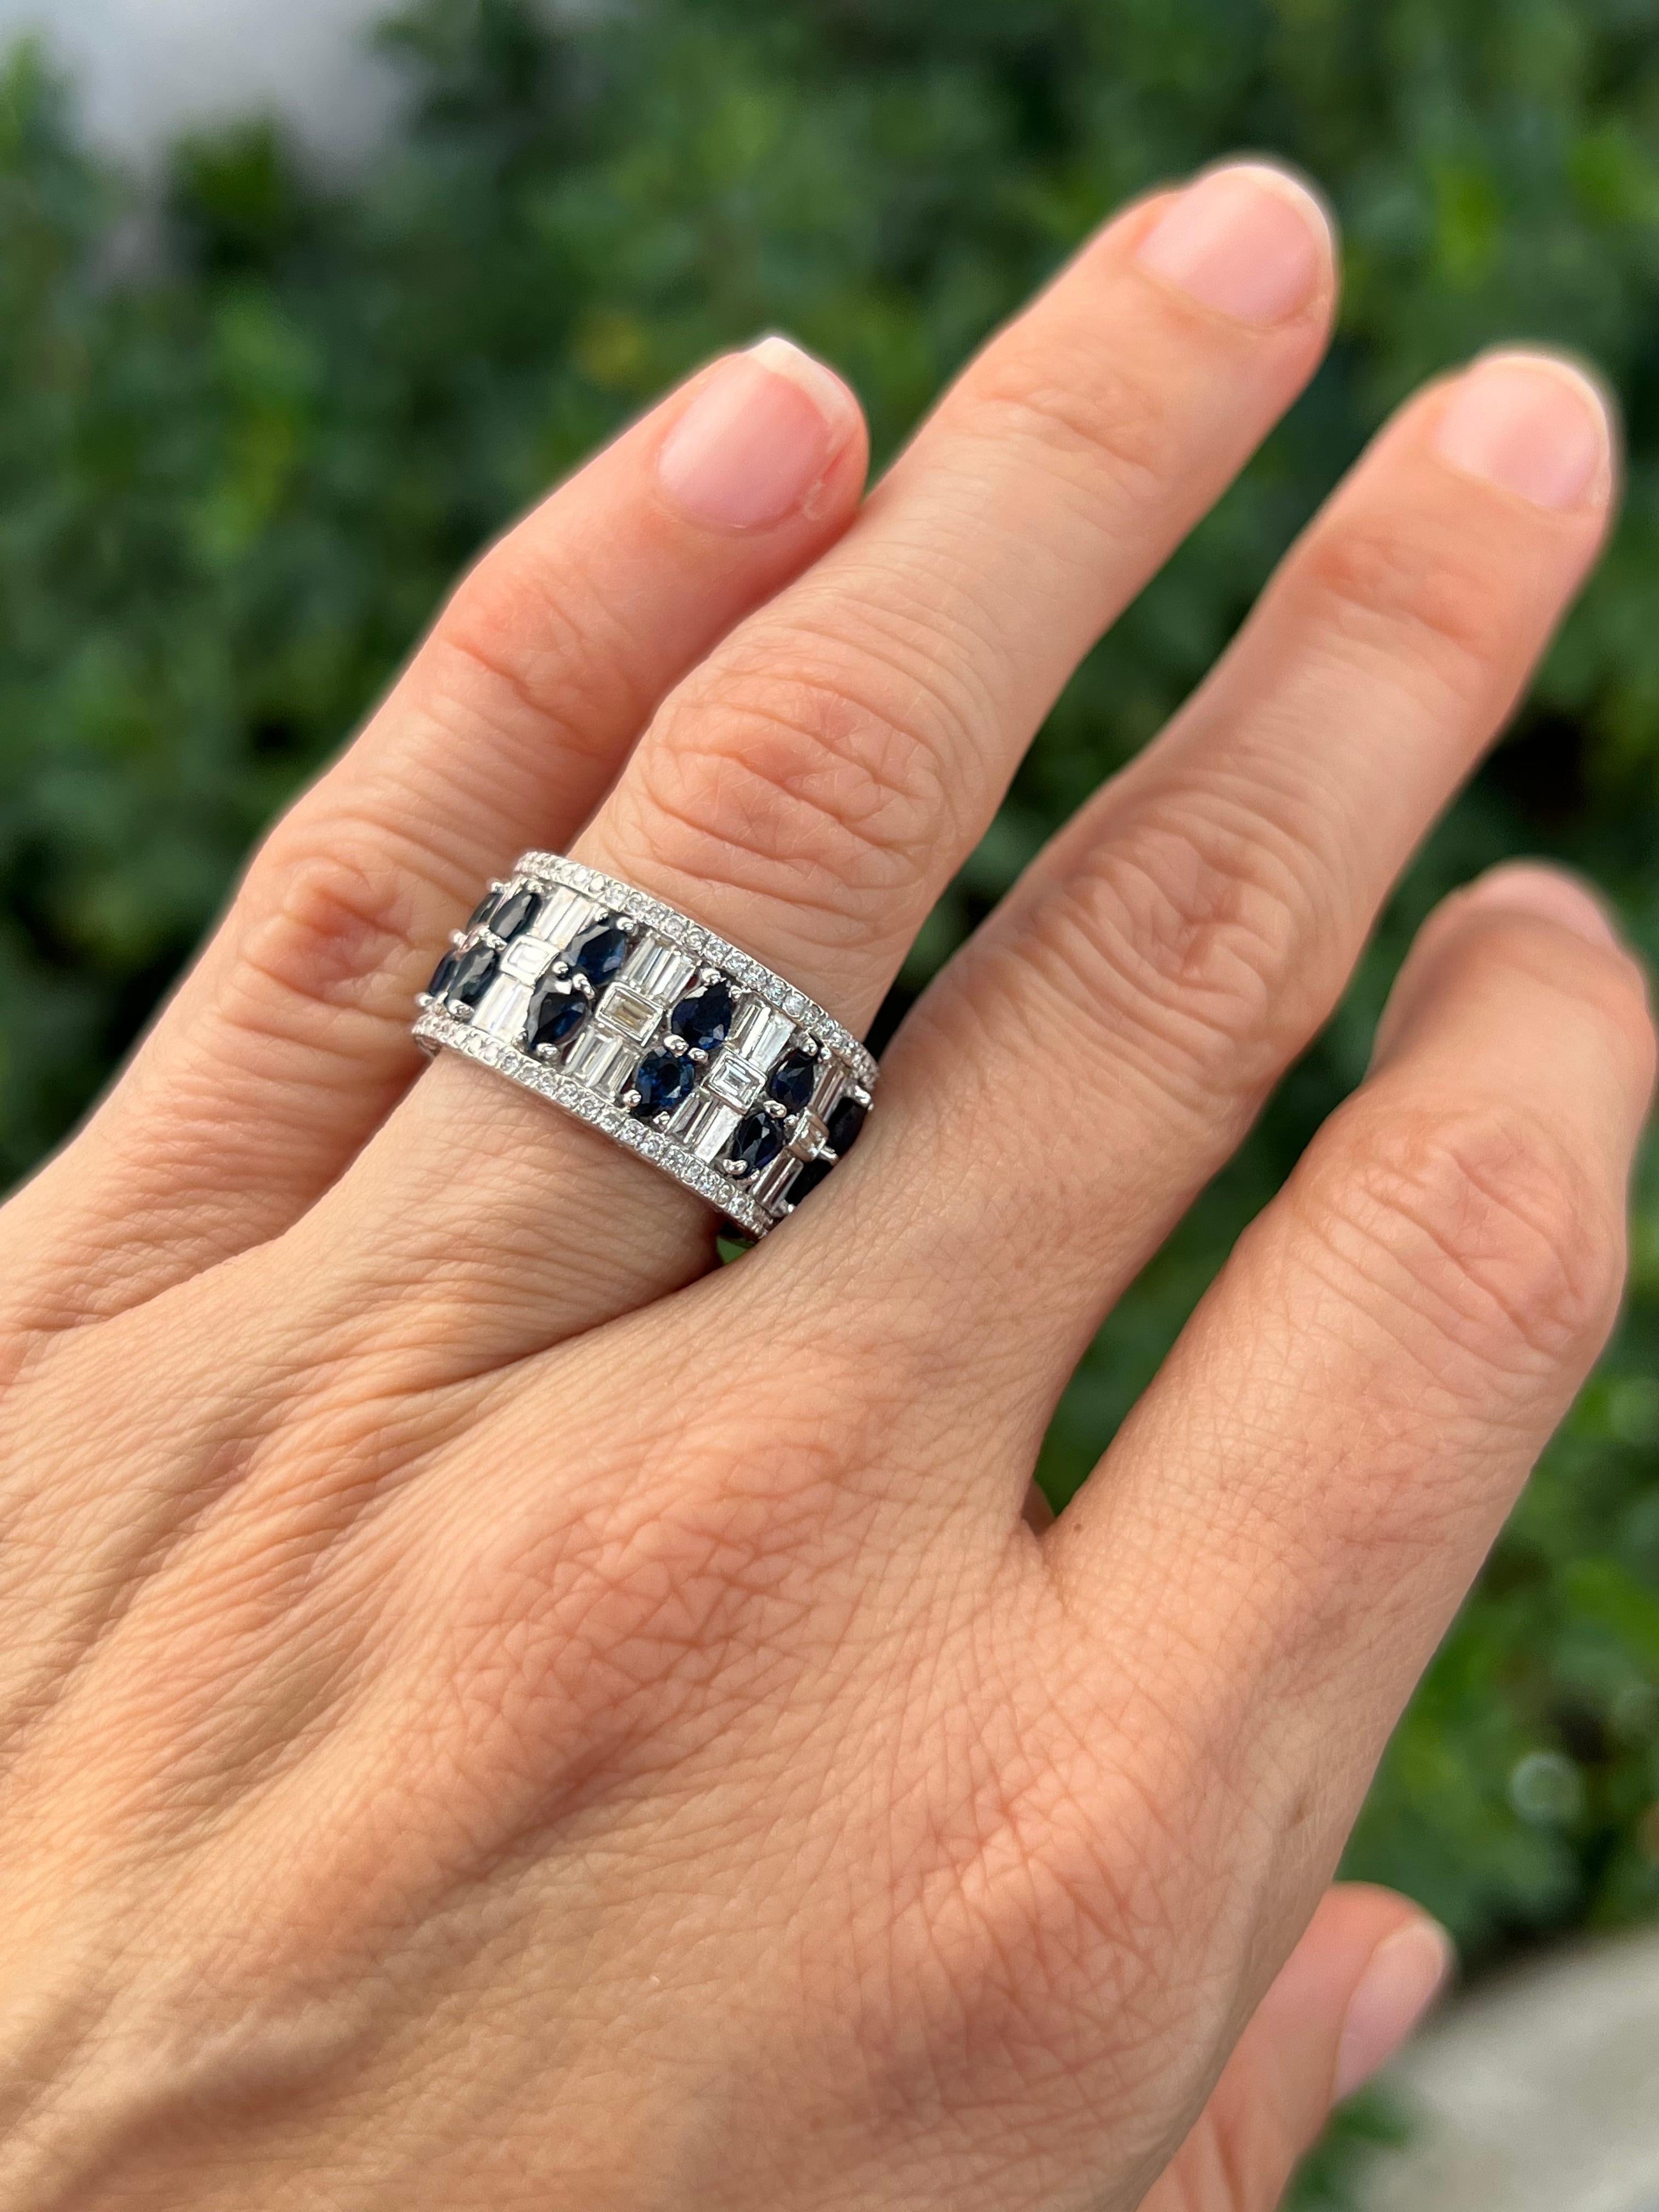 14K white gold baguette diamond eternity band with pear shape sapphires and prong set brilliant cut diamonds edge. 

Features
14K white gold
2.60 carat total weight in diamonds
5.10 carat total weight in sapphire
Ring size 7, cannot be sized. 